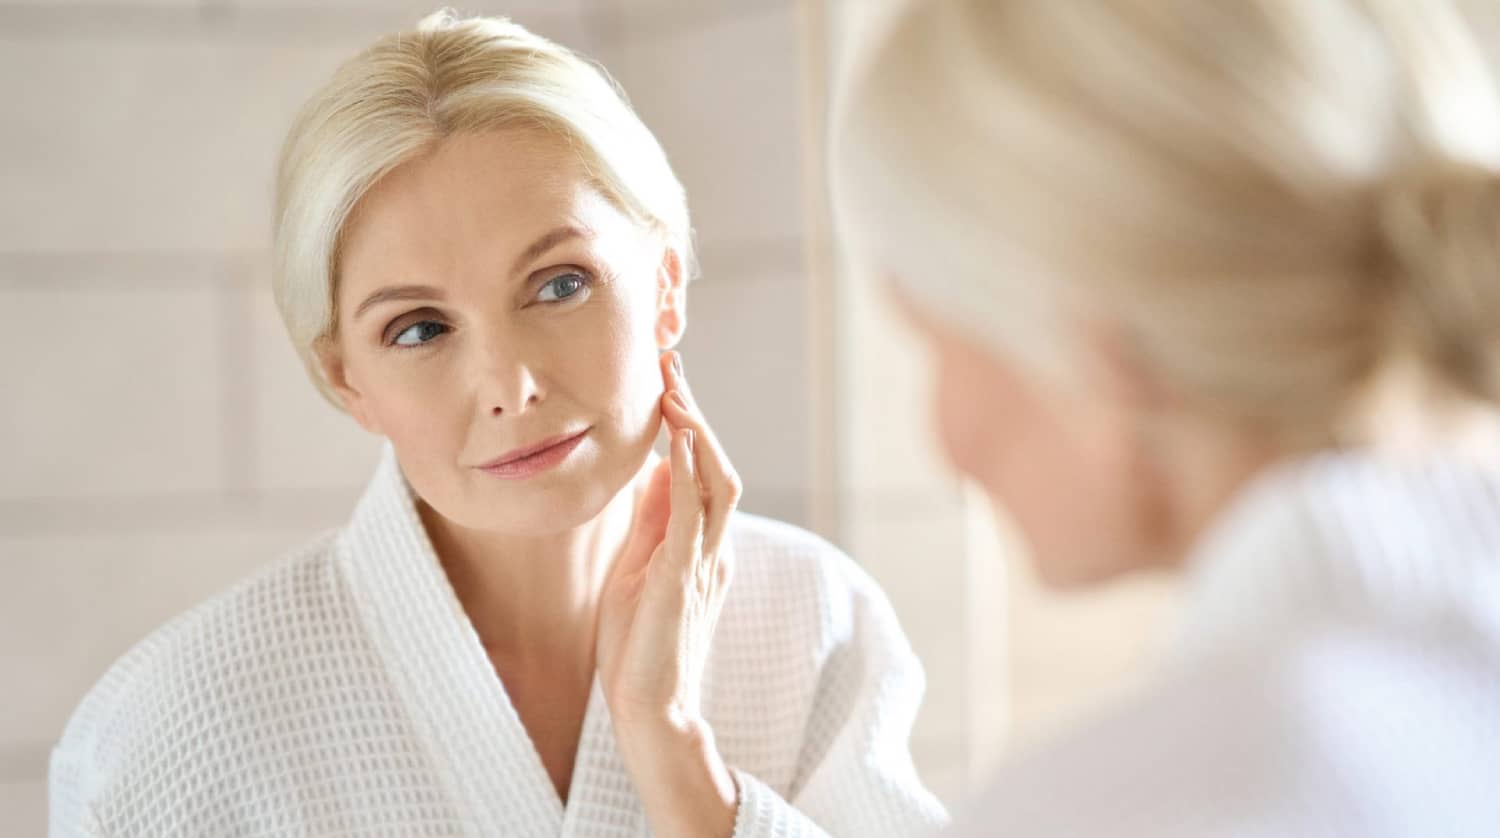 4 Non-Invasive Techniques to Look Younger at the Best Med Spa in the Southeast